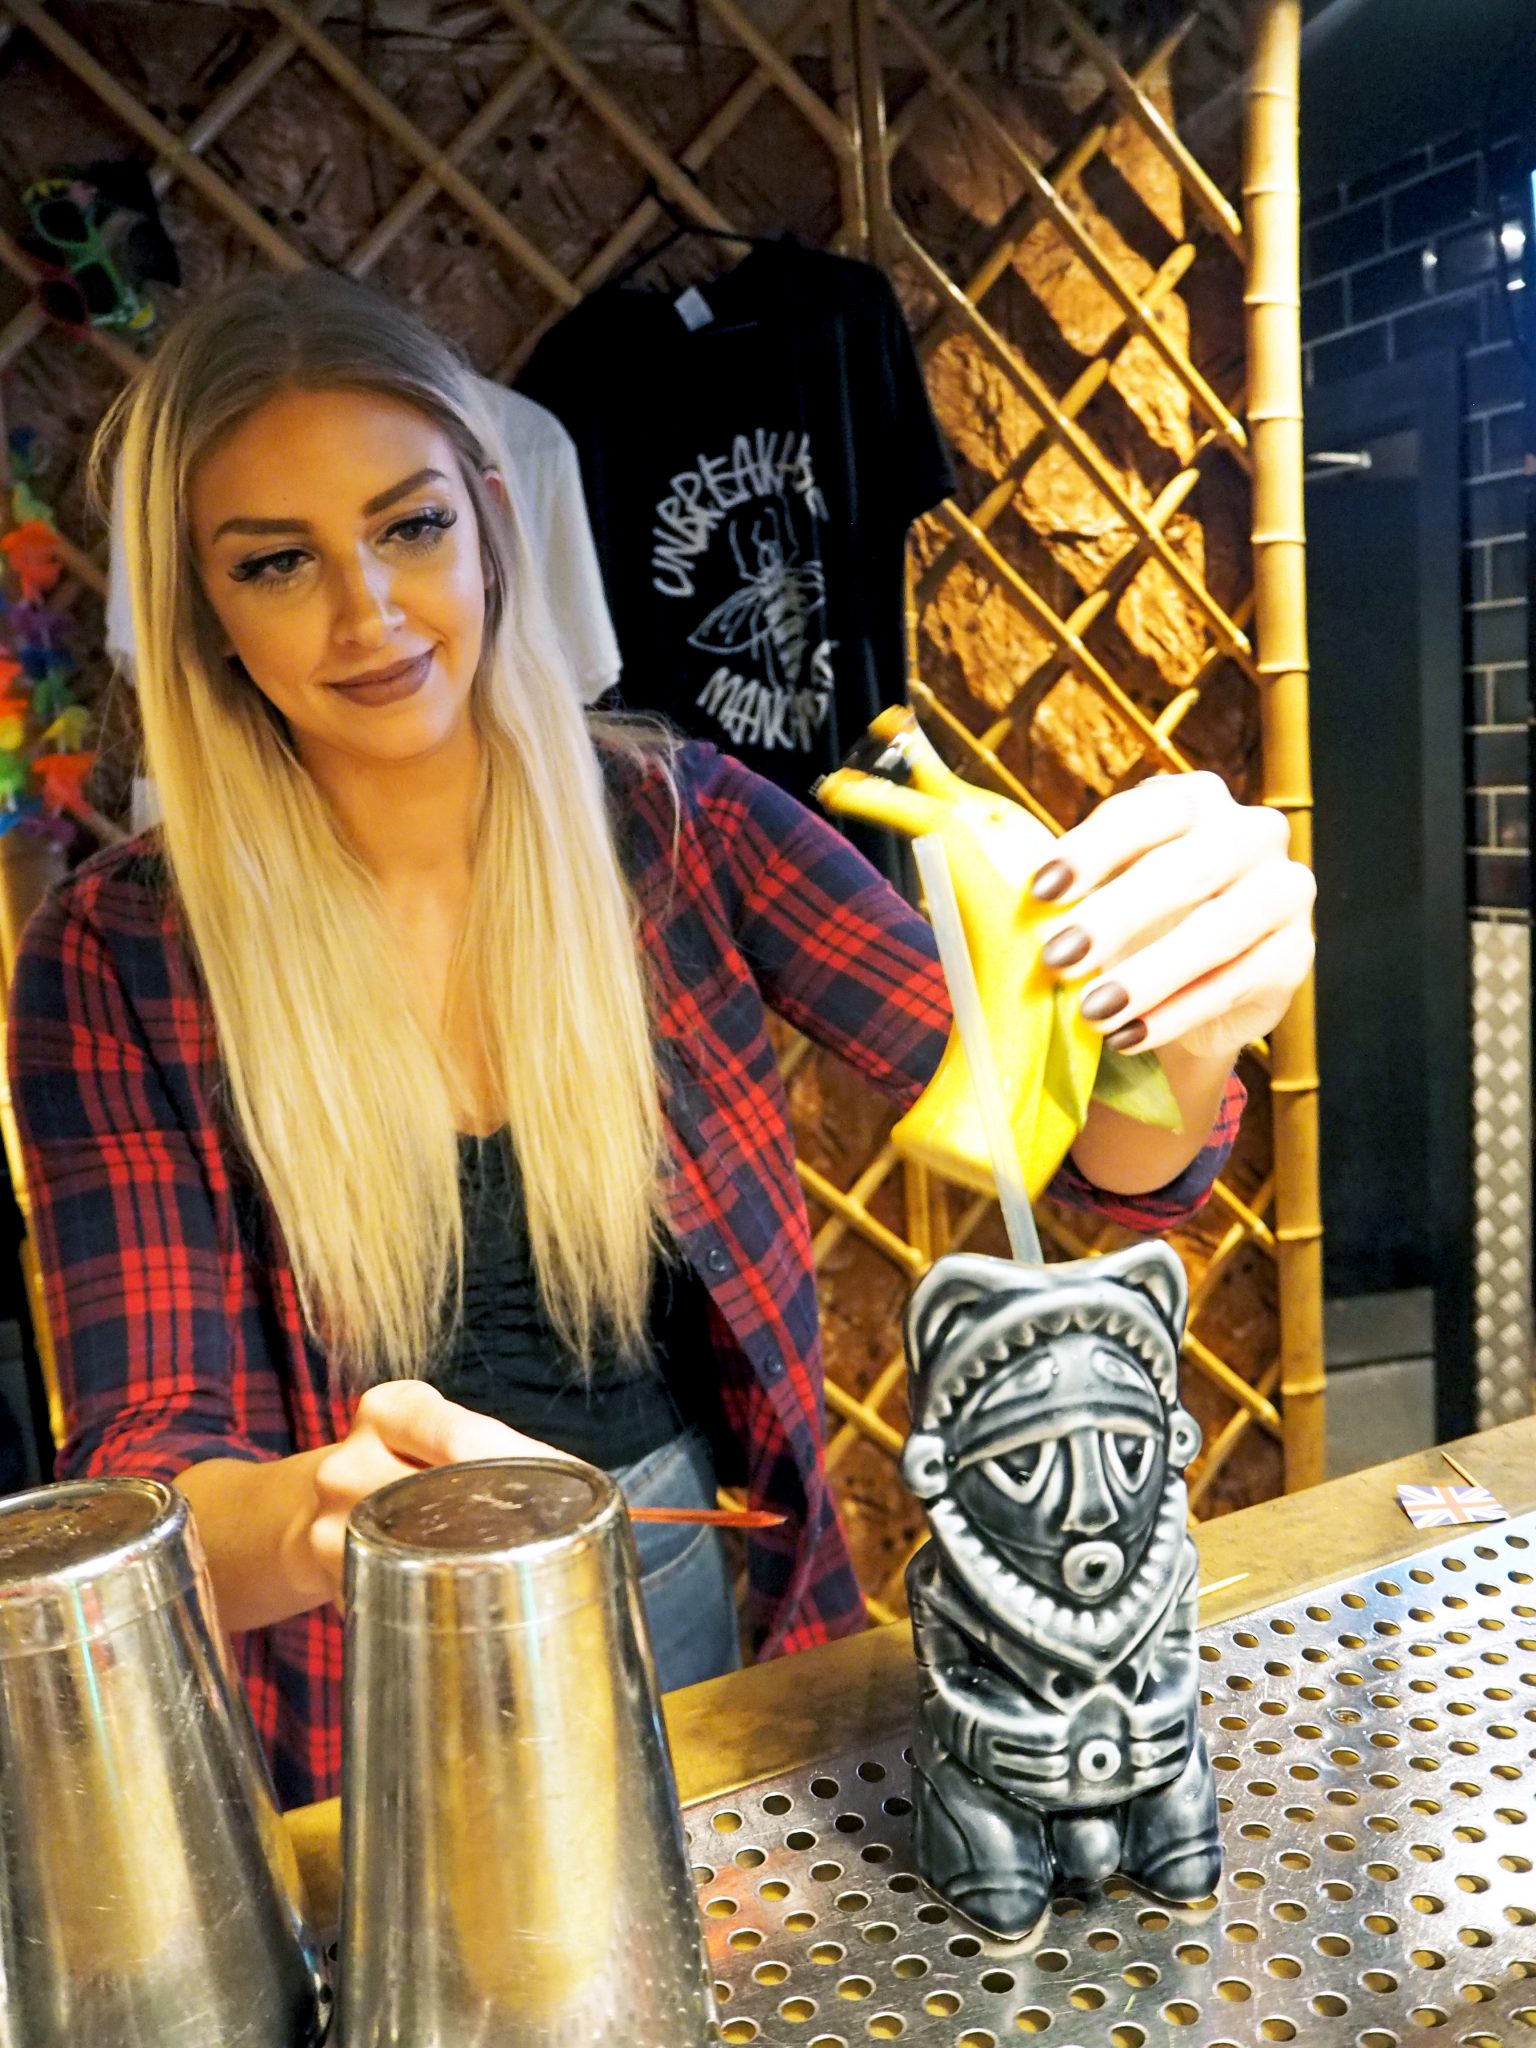 Laura Kate Lucas - Manchester Fashion, Food and Fitness - Lifestyle Blogger | Liar's Club Cocktail Bar Masterclass and New Menu